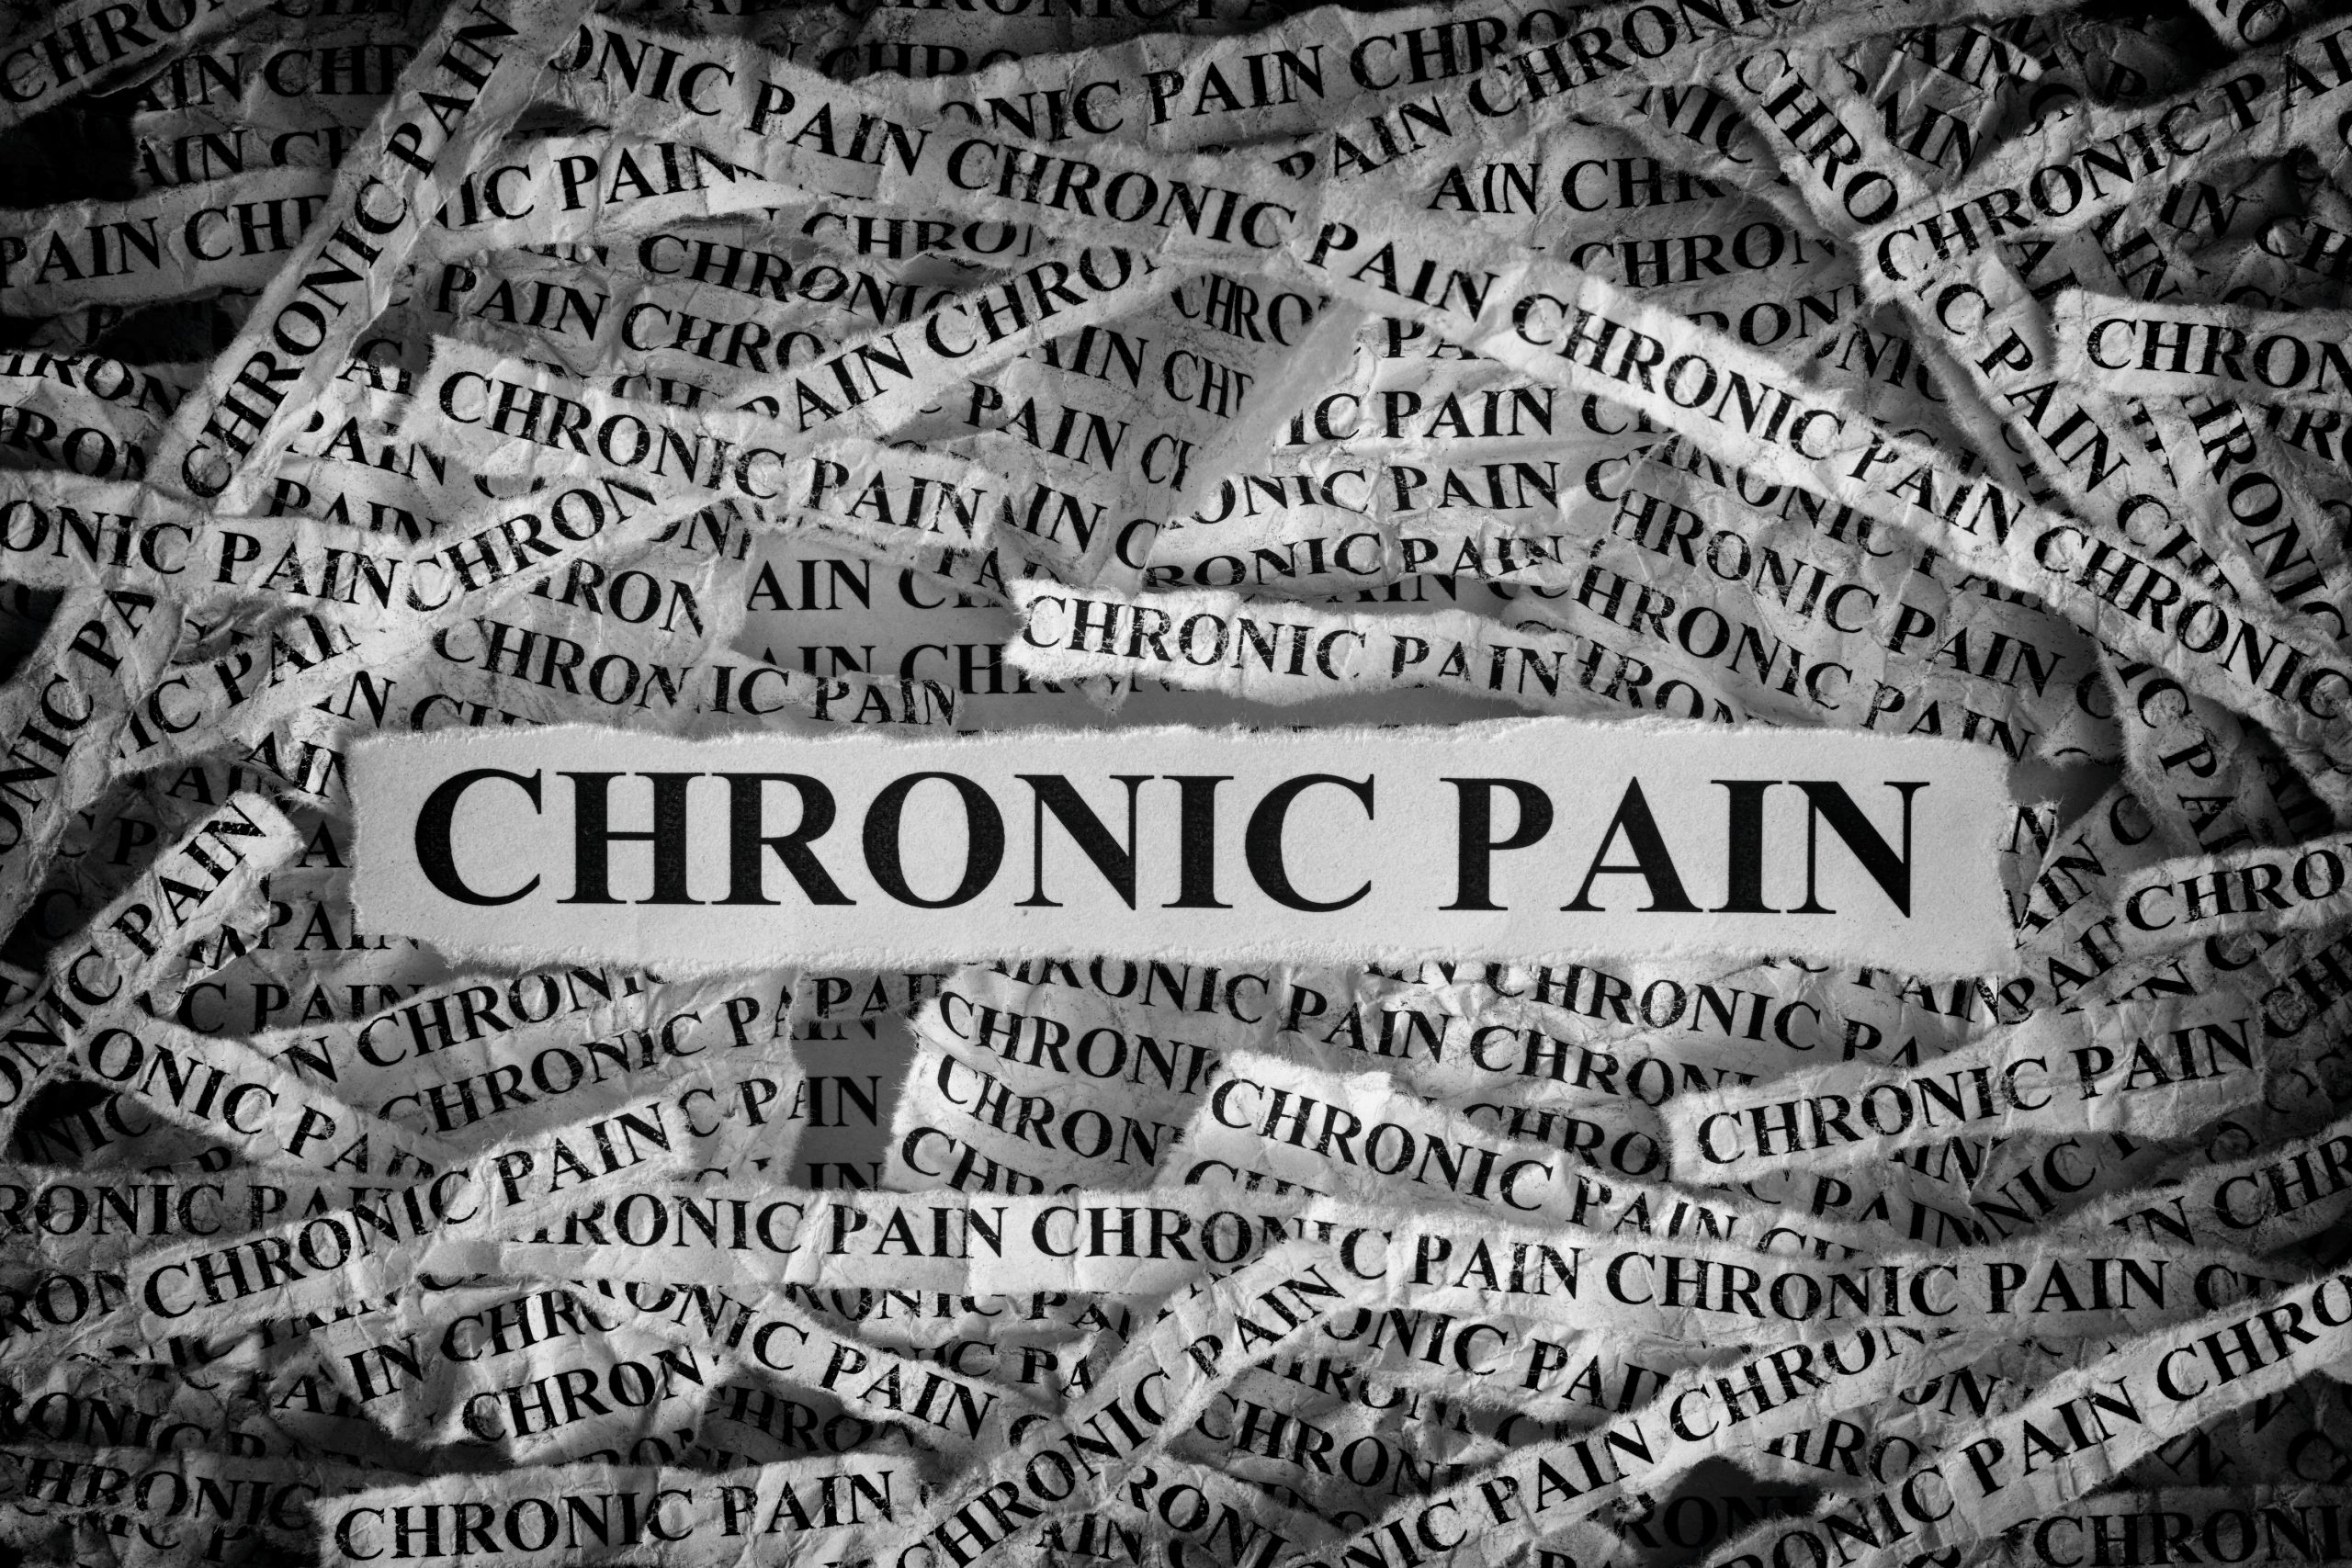 https://www.hlmlawfirm.com/wp-content/uploads/2021/09/More-Than-50-Million-Americans-Live-With-Chronic-Pain-scaled.jpeg